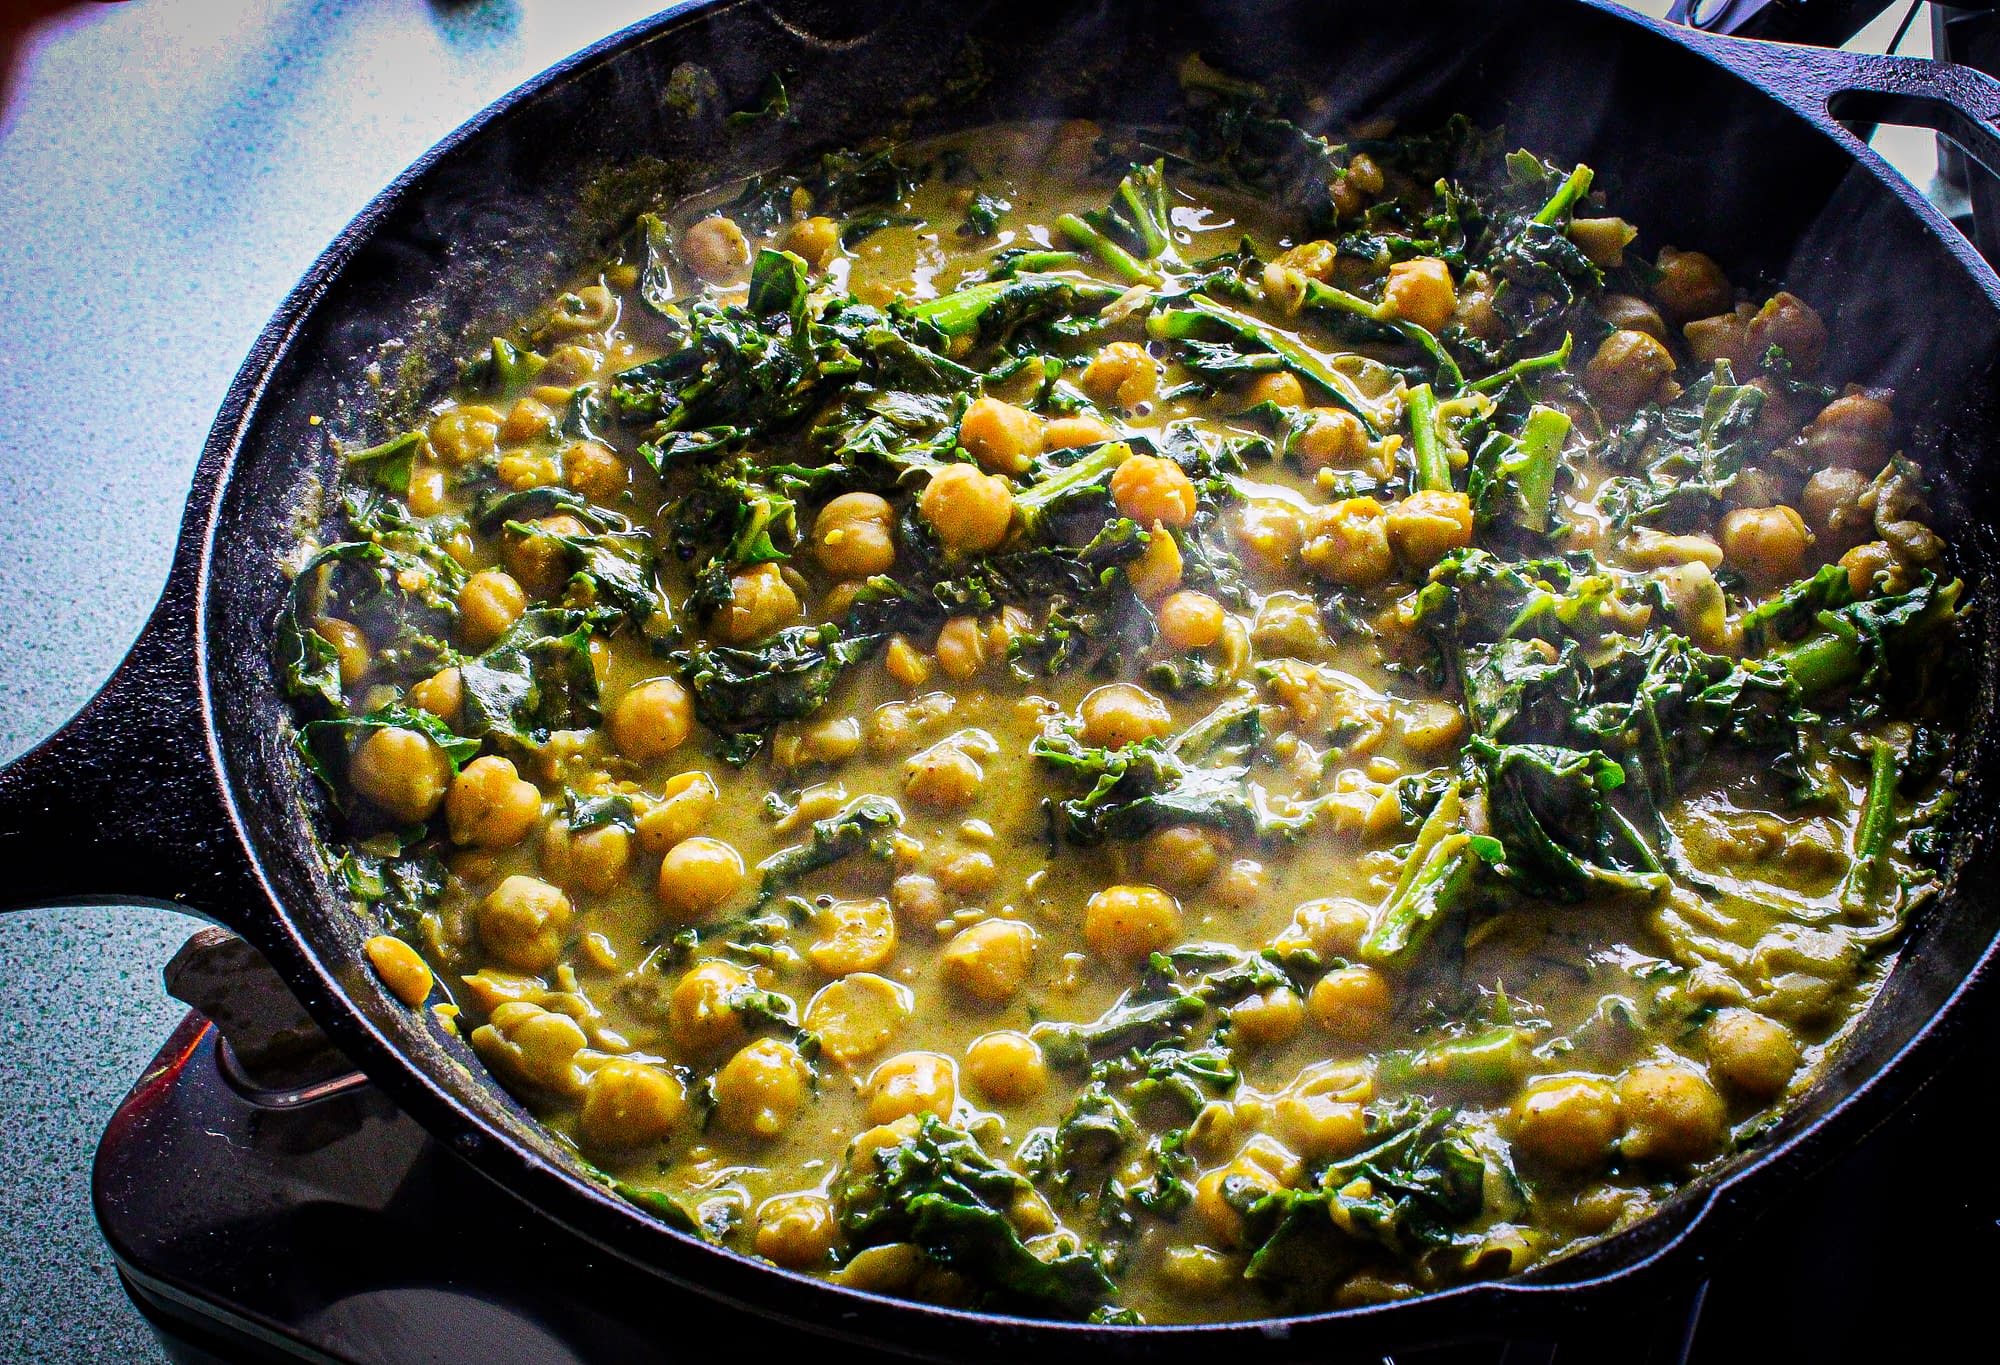 Curried chickpeas cooking.